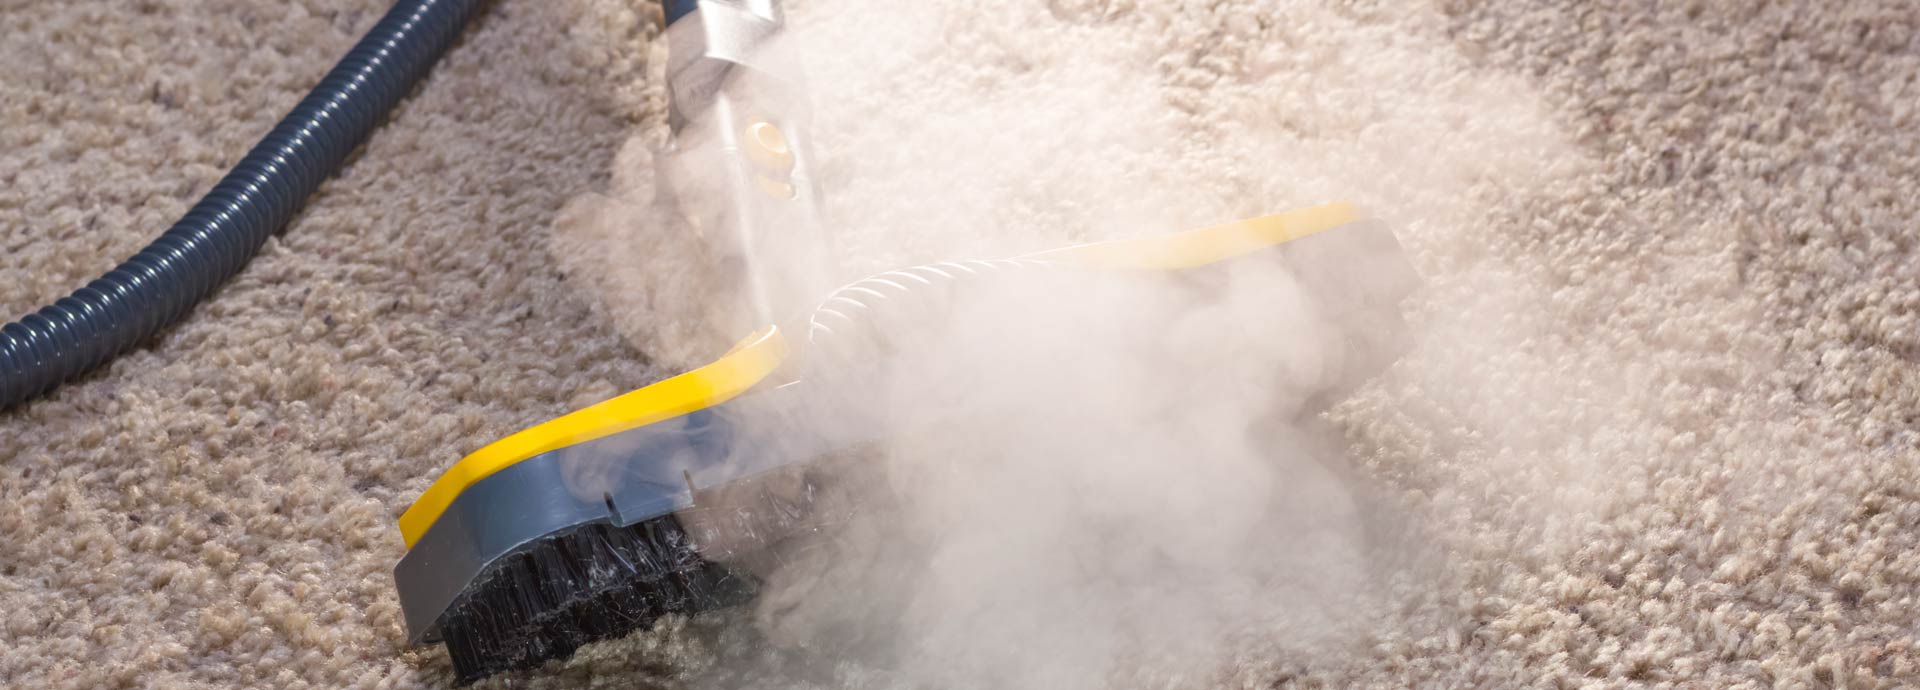 Carpet Cleaning In Houston Texas 2